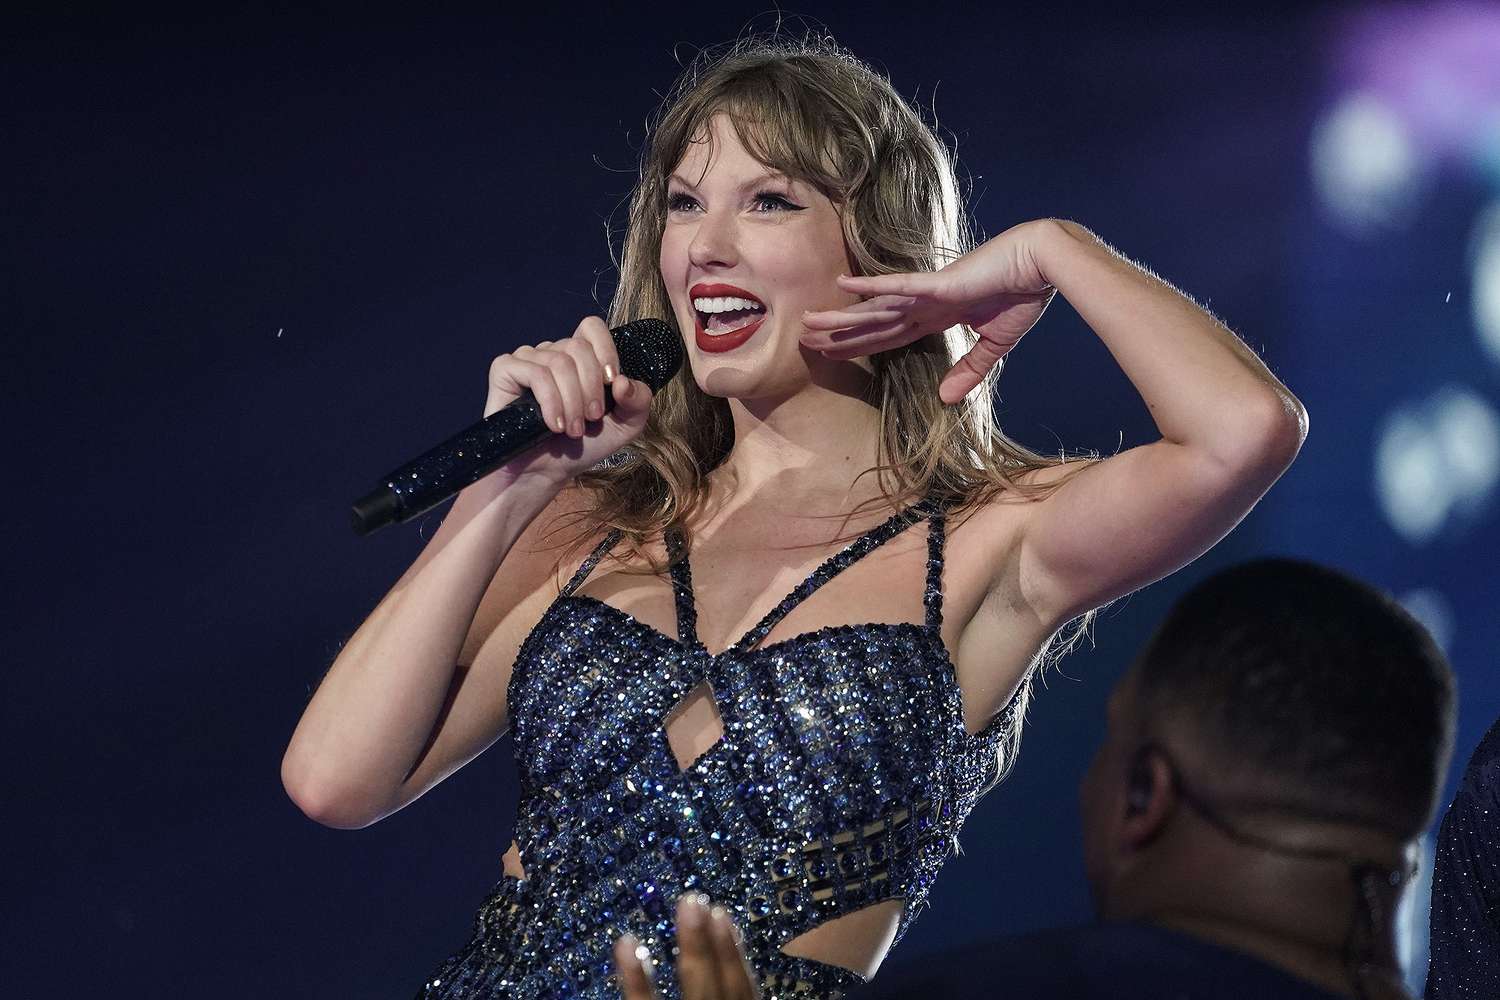 Taylor Swift Says She Is In 'Excellent Mood’ After Eras Tour Becomes 1st to Play 3 Sold Out Shows in Warsaw Stadium